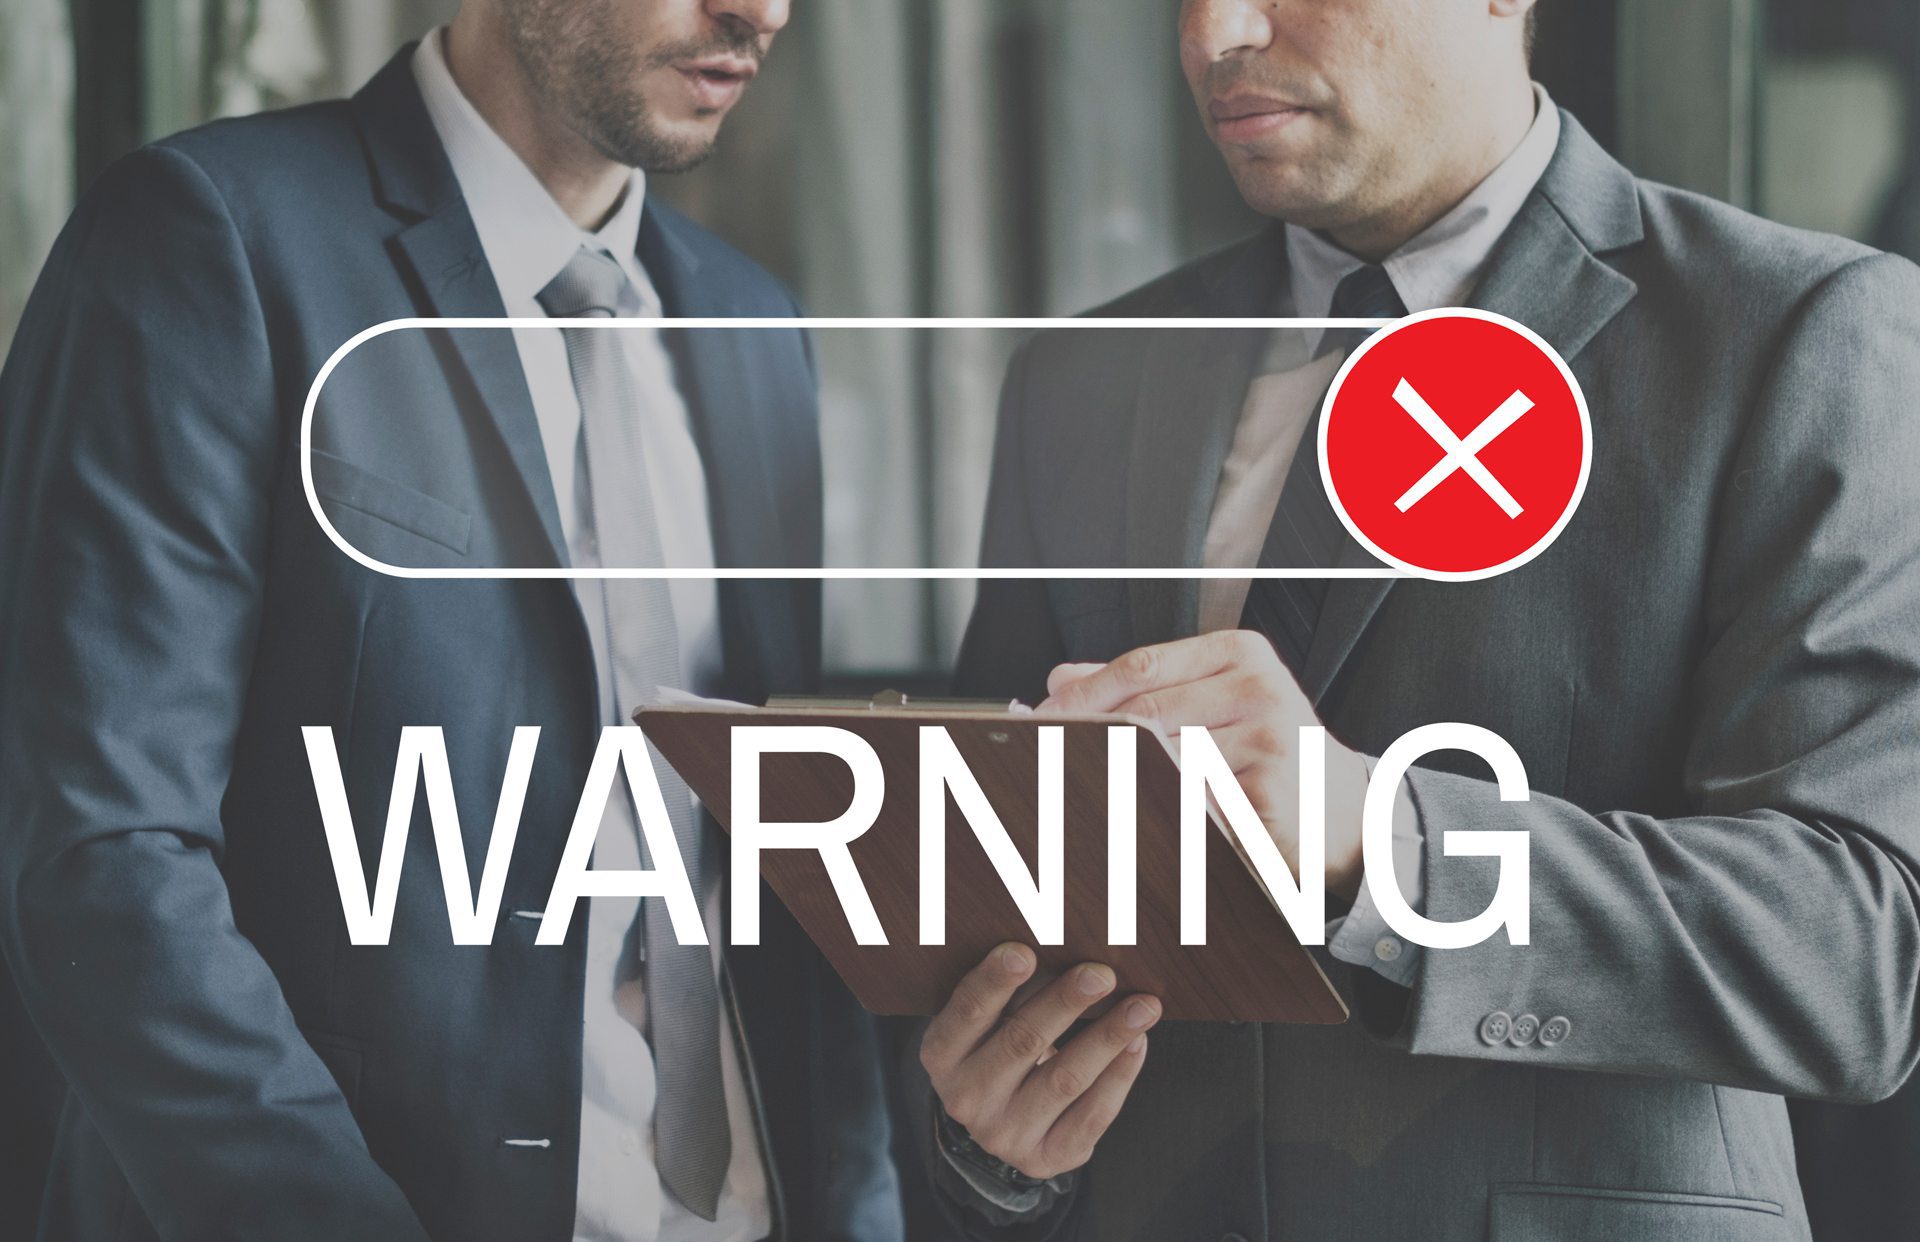 This is a warning. Make sure you r inbound marketing doesn't make any of these mistakes.